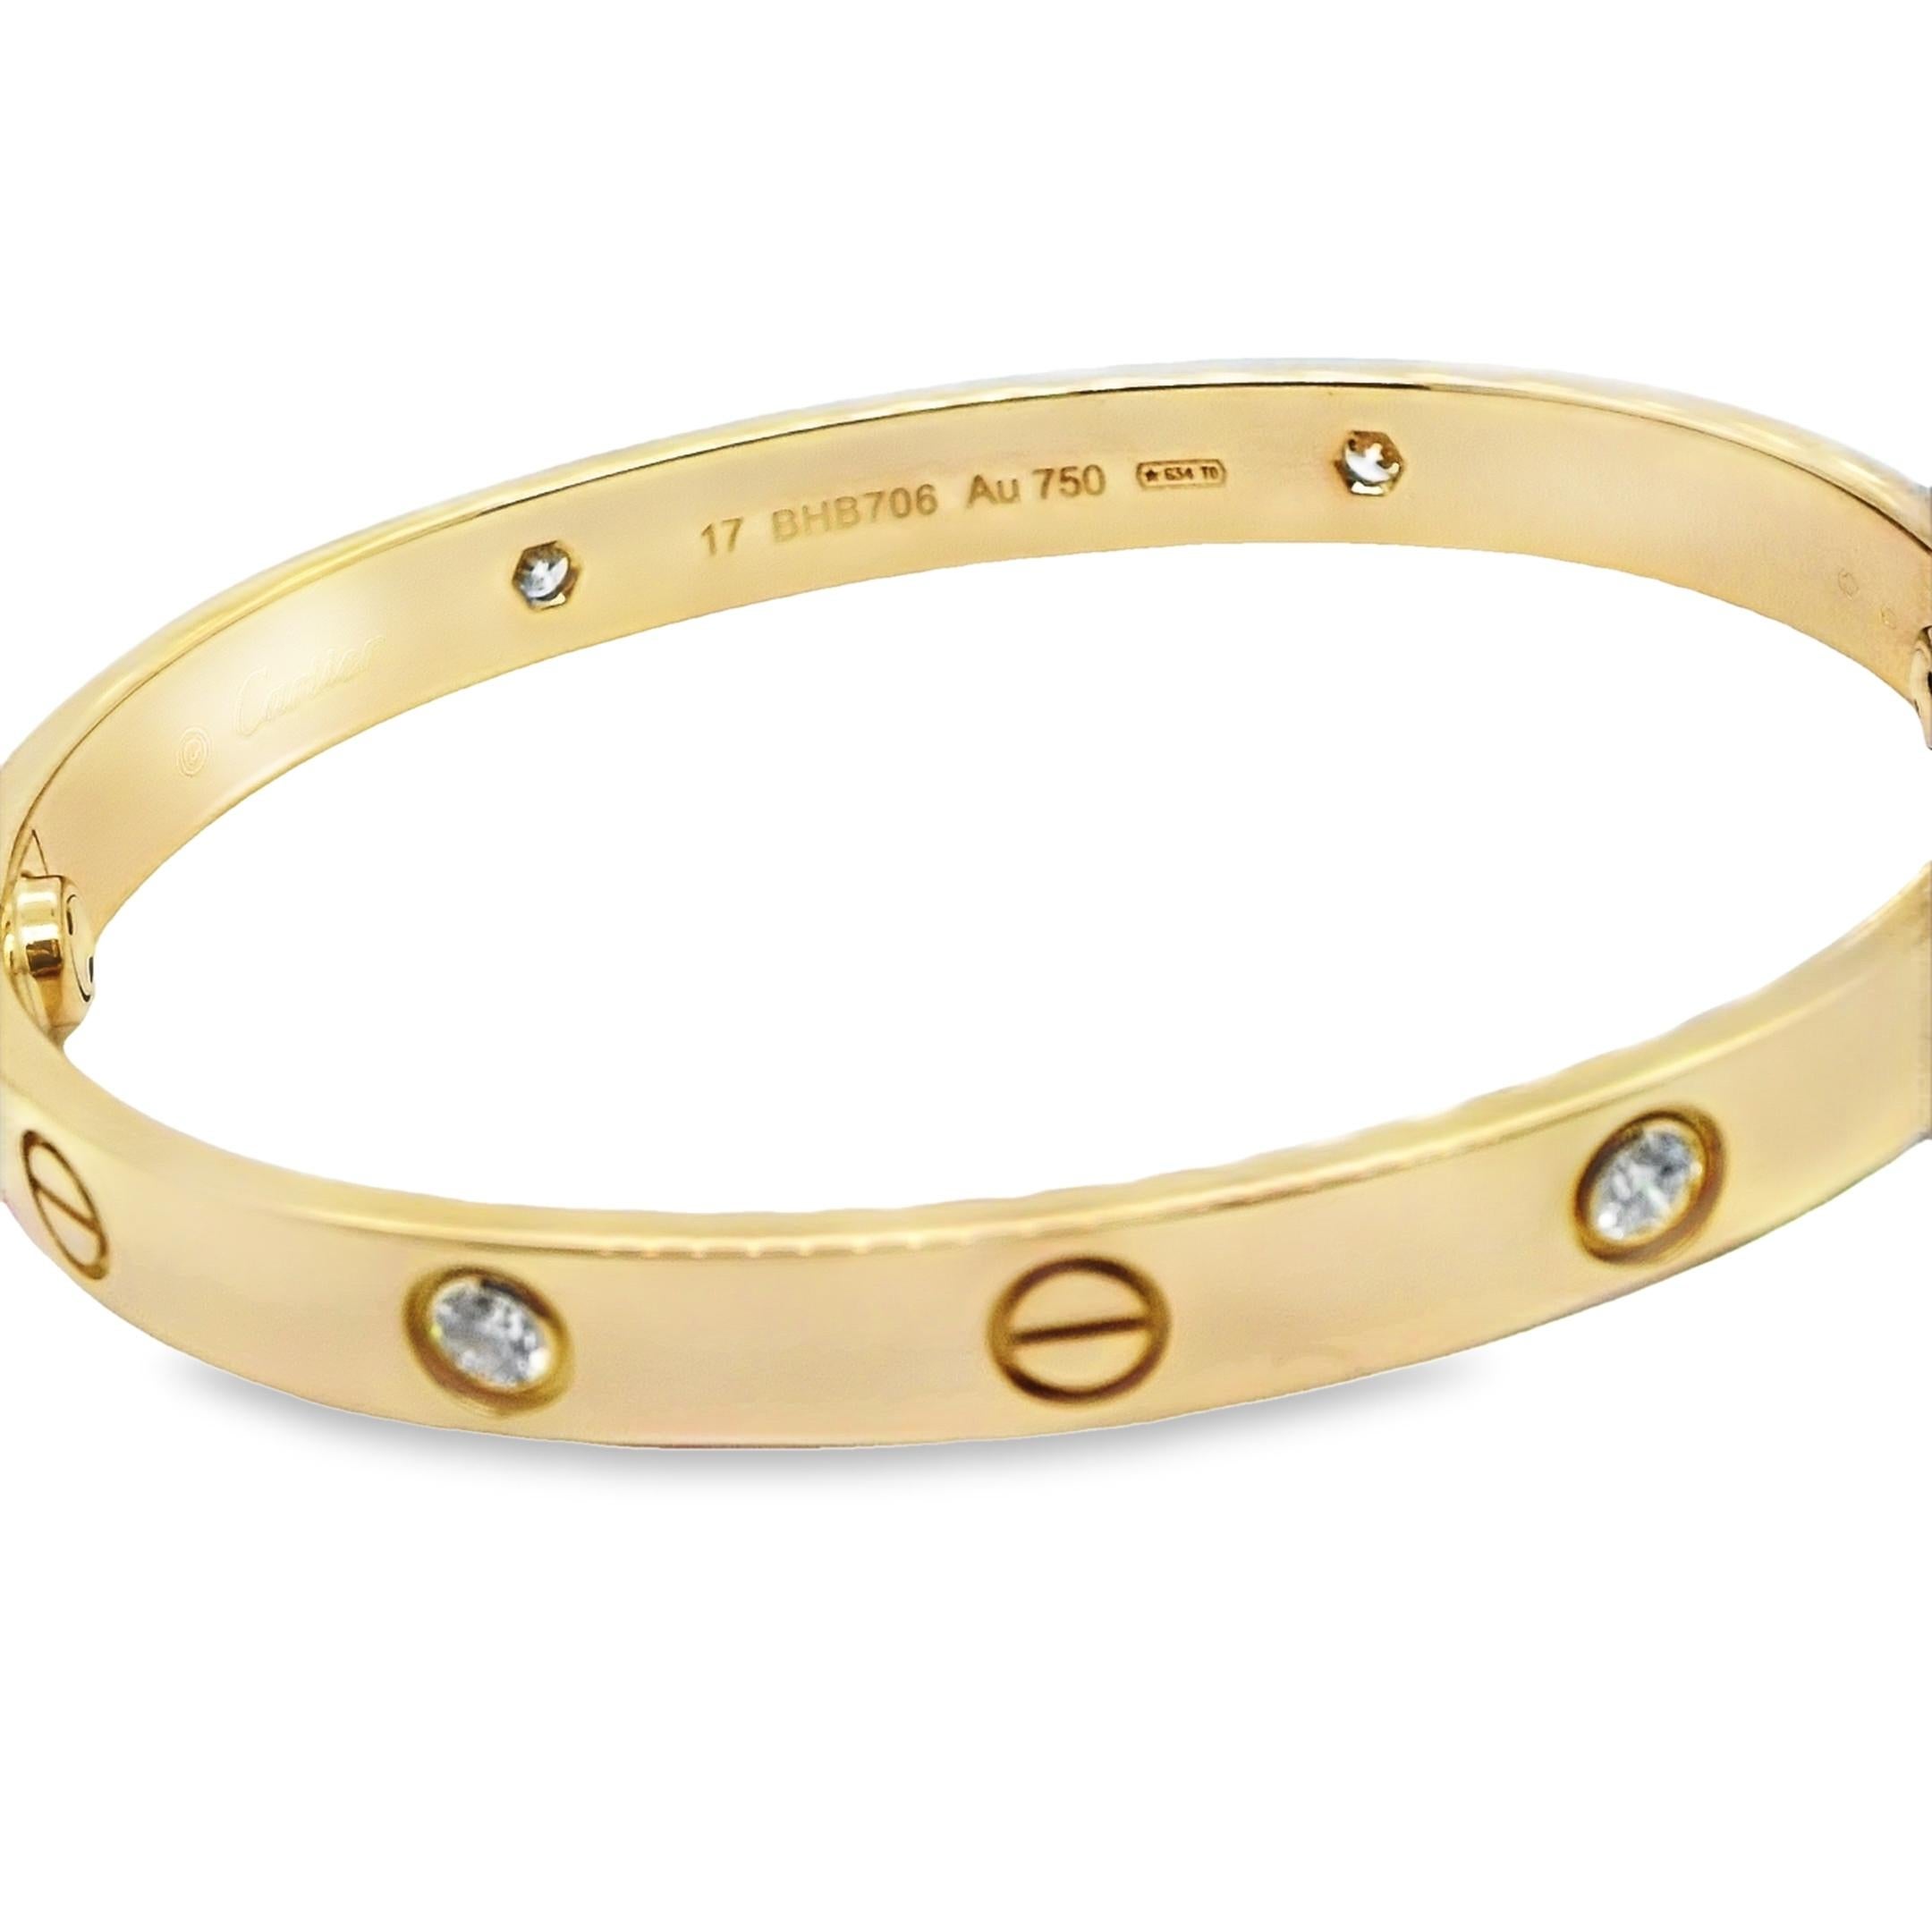 Cartier Love bracelet, set with 4 Diamonds.

The Iconic Cartier bracelet, size 17cm with 4 Diamonds Ref: B6070017

This amazing chic bracelet comes fully set in 18ct yellow gold set with 4 Diamonds with a total diamond weight of 0.42ct, a collectors